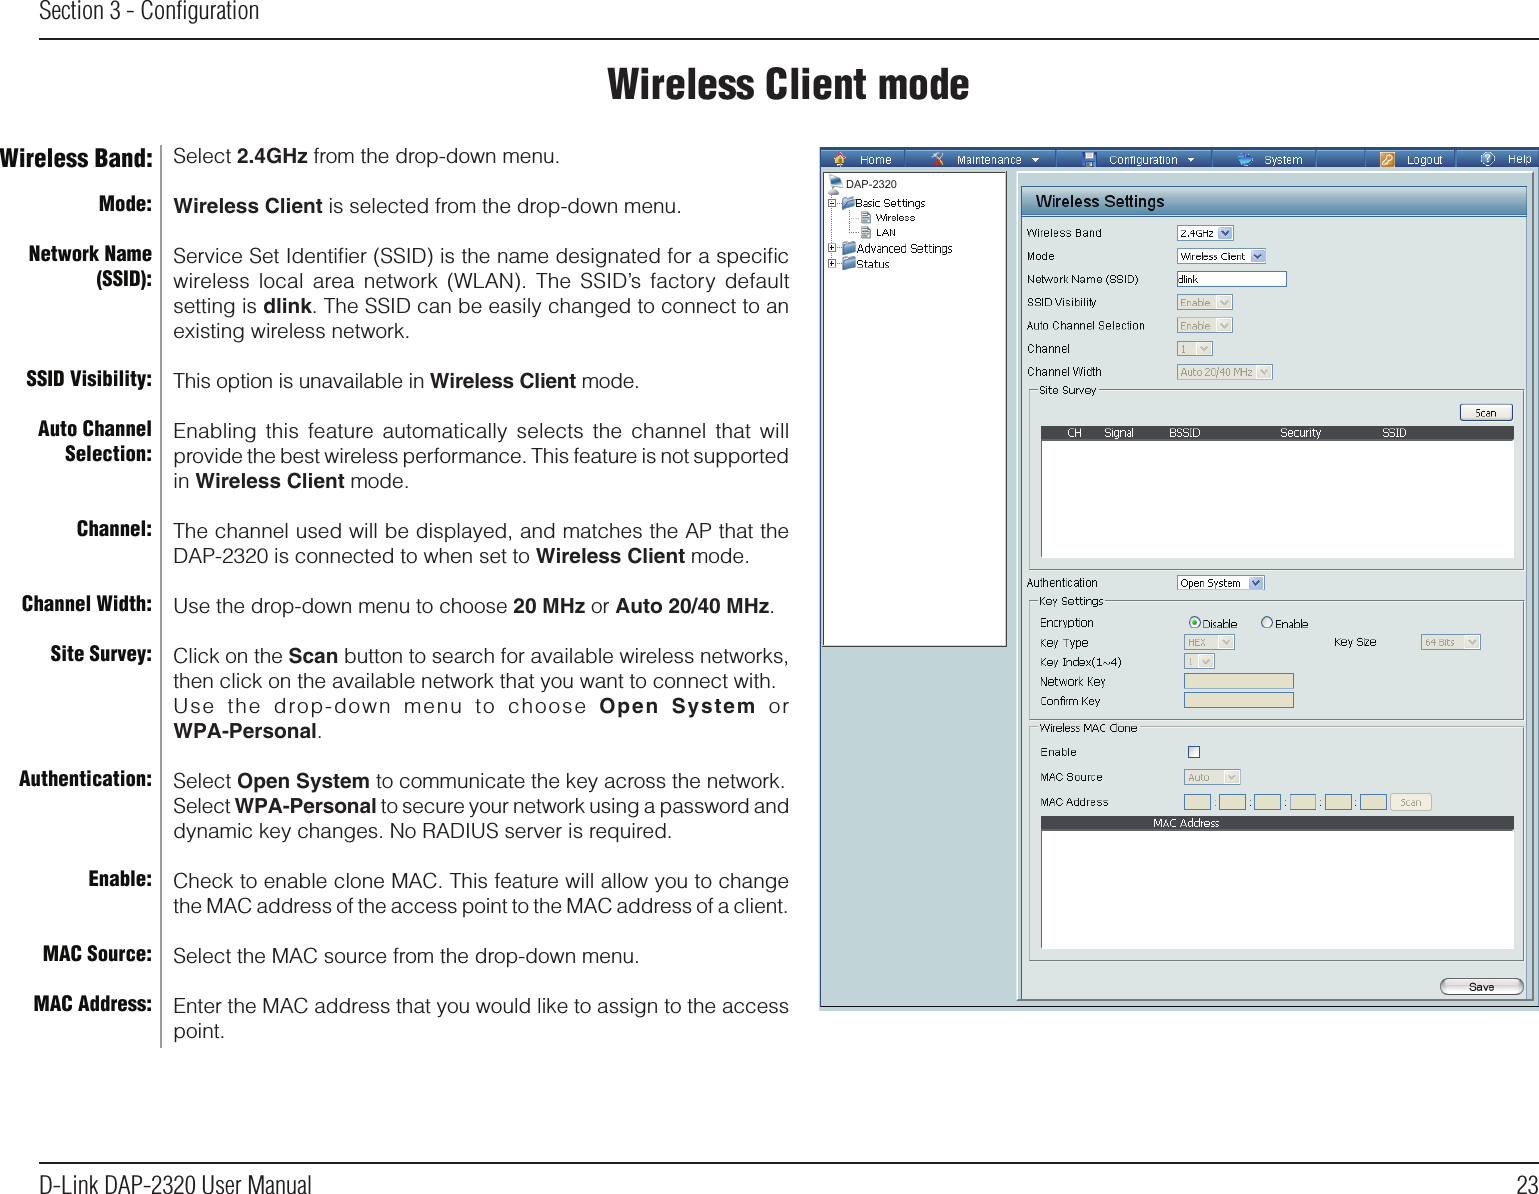 23D-Link DAP-2320 User ManualSection 3 - ConﬁgurationWireless Client modeMode:Network Name (SSID):SSID Visibility:Auto Channel Selection:Channel:Channel Width:Site Survey:Authentication:Enable:MAC Source:MAC Address:Wireless Band: Select 2.4GHz from the drop-down menu. Wireless Client is selected from the drop-down menu.Service Set Identiﬁer (SSID) is the name designated for a speciﬁc wireless local area  network  (WLAN).  The  SSID’s  factory  default setting is dlink. The SSID can be easily changed to connect to an existing wireless network.This option is unavailable in Wireless Client mode.Enabling  this  feature automatically selects the channel that  will provide the best wireless performance. This feature is not supported in Wireless Client mode.The channel used will be displayed, and matches the AP that the DAP-2320 is connected to when set to Wireless Client mode.Use the drop-down menu to choose 20 MHz or Auto 20/40 MHz.Click on the Scan button to search for available wireless networks, then click on the available network that you want to connect with.Use  the  drop-down  menu  to  choose  Open  System  orWPA-Personal.Select Open System to communicate the key across the network.Select WPA-Personal to secure your network using a password and dynamic key changes. No RADIUS server is required.Check to enable clone MAC. This feature will allow you to change the MAC address of the access point to the MAC address of a client.Select the MAC source from the drop-down menu.Enter the MAC address that you would like to assign to the access point.DAP-2320